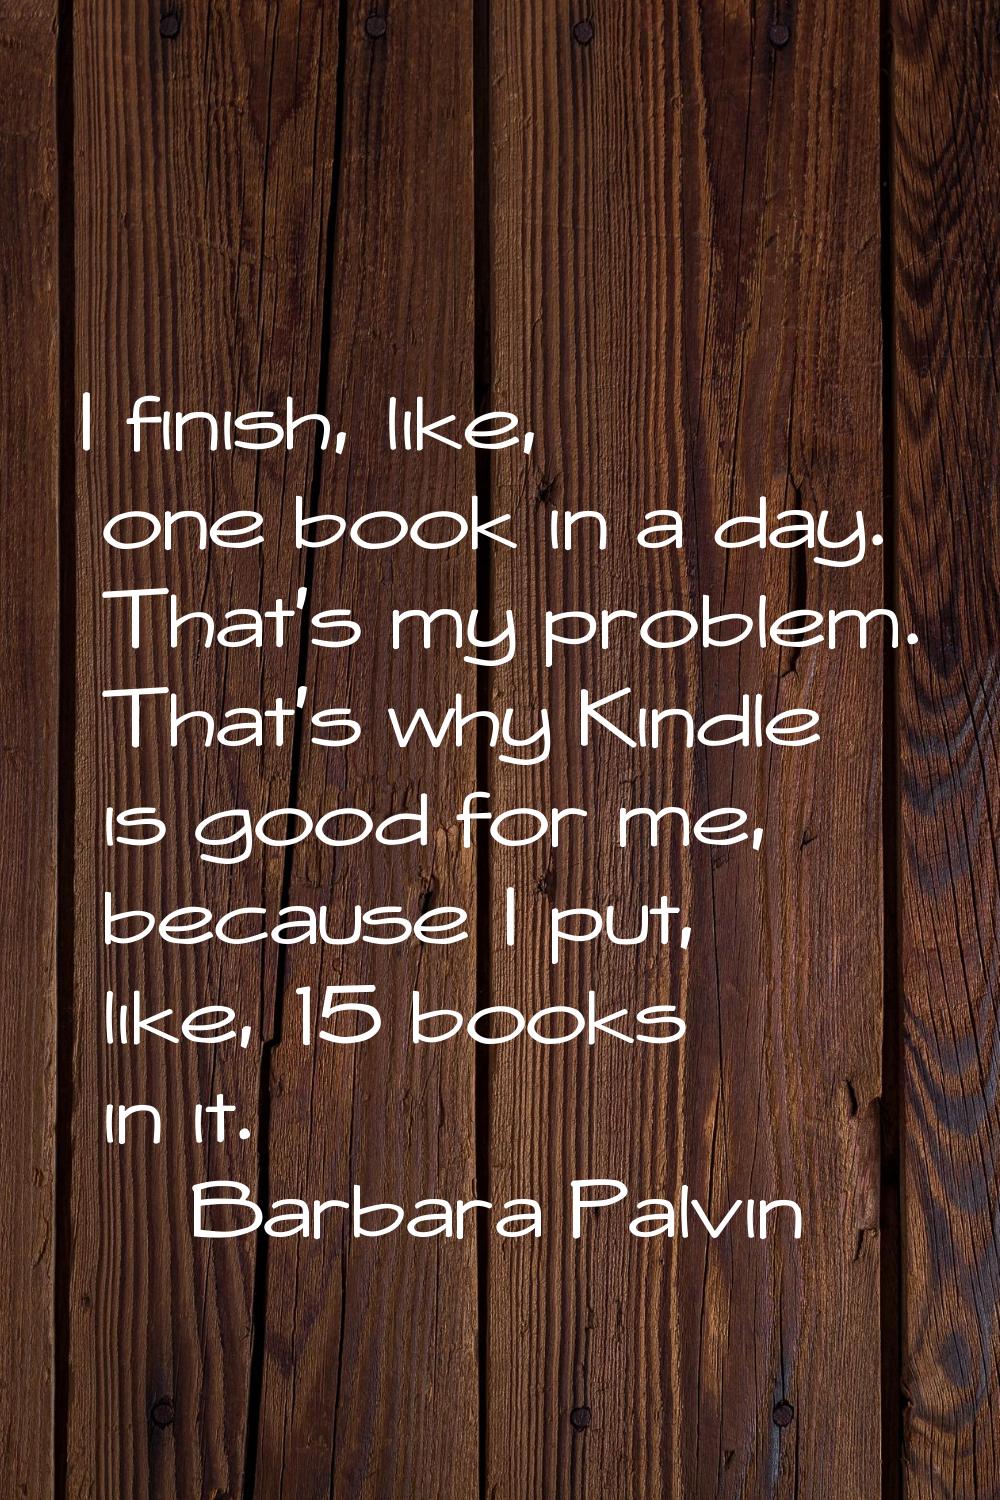 I finish, like, one book in a day. That's my problem. That's why Kindle is good for me, because I p